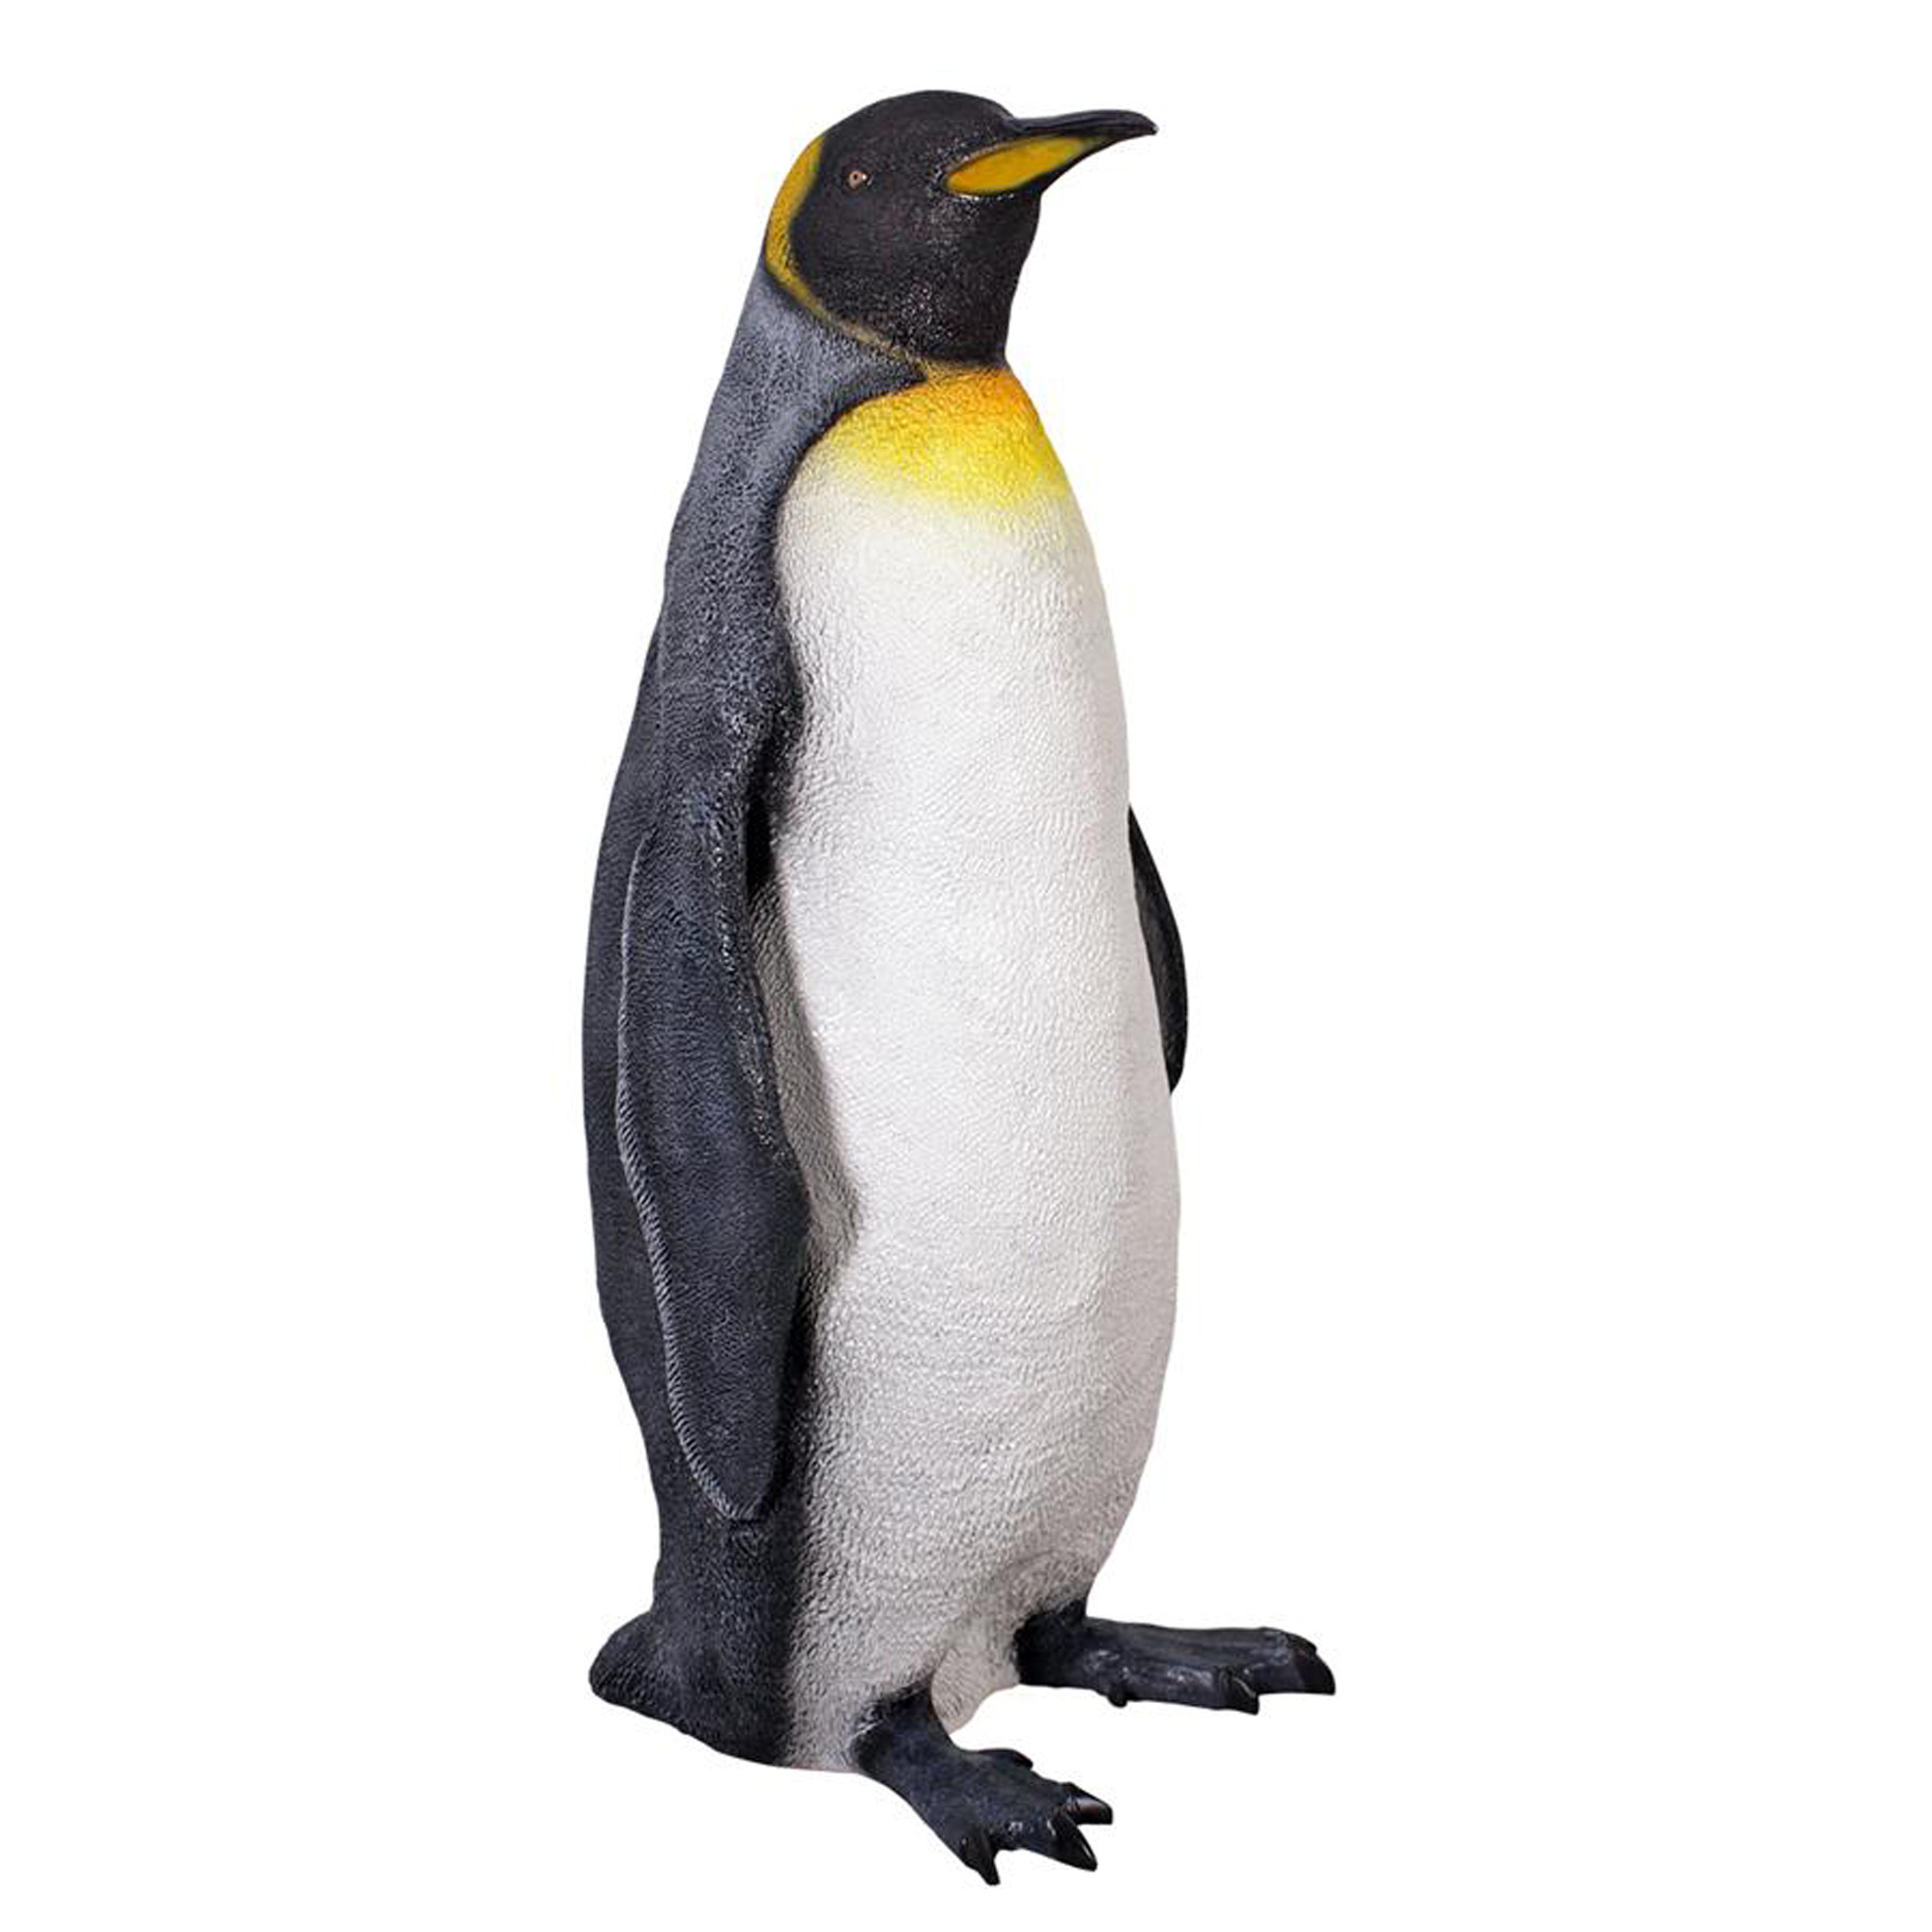 Outdoor Living and Style Design Toscano Antarctic King Penguin Outdoor Garden Statue, Large